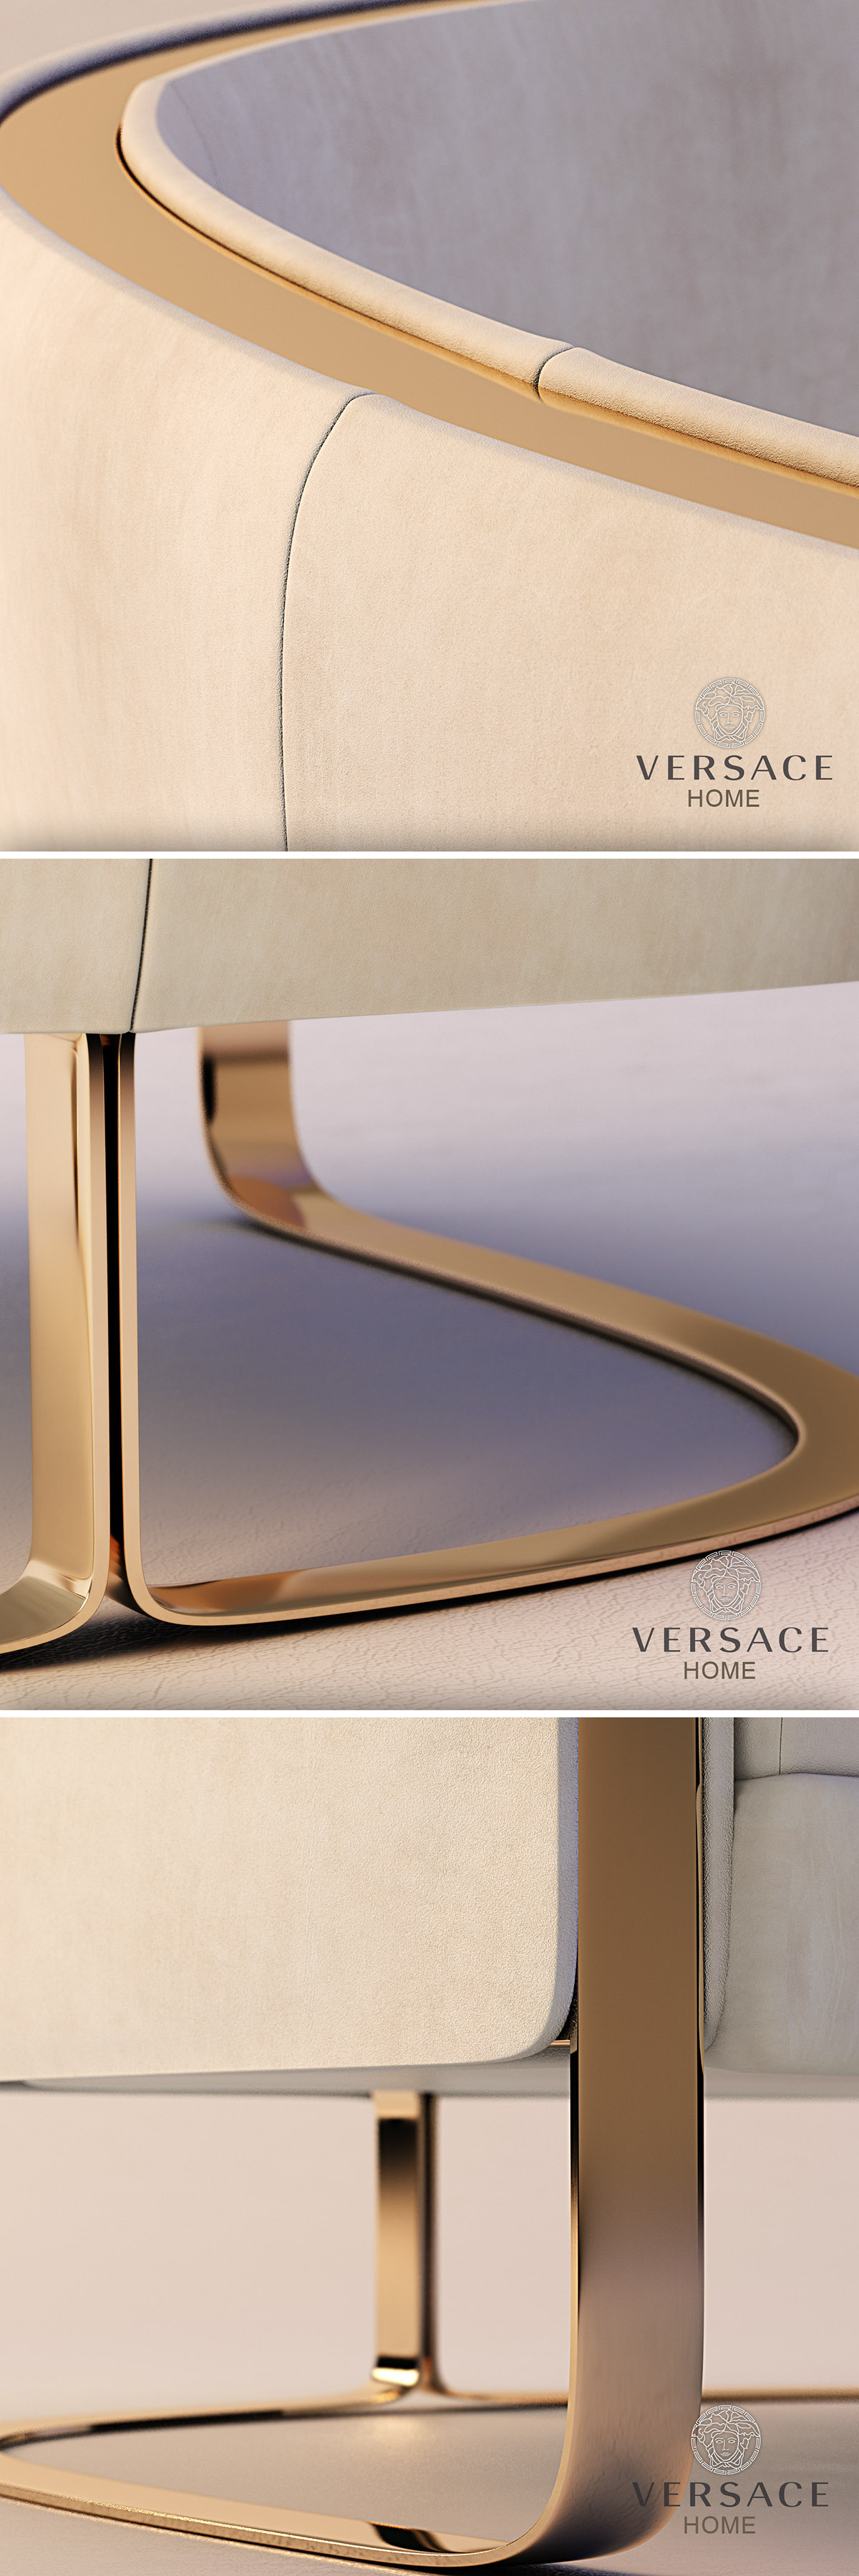 VERSACE Hreald armchair table furniture contemporary luxury modeling modern Classic italia Verasce Home